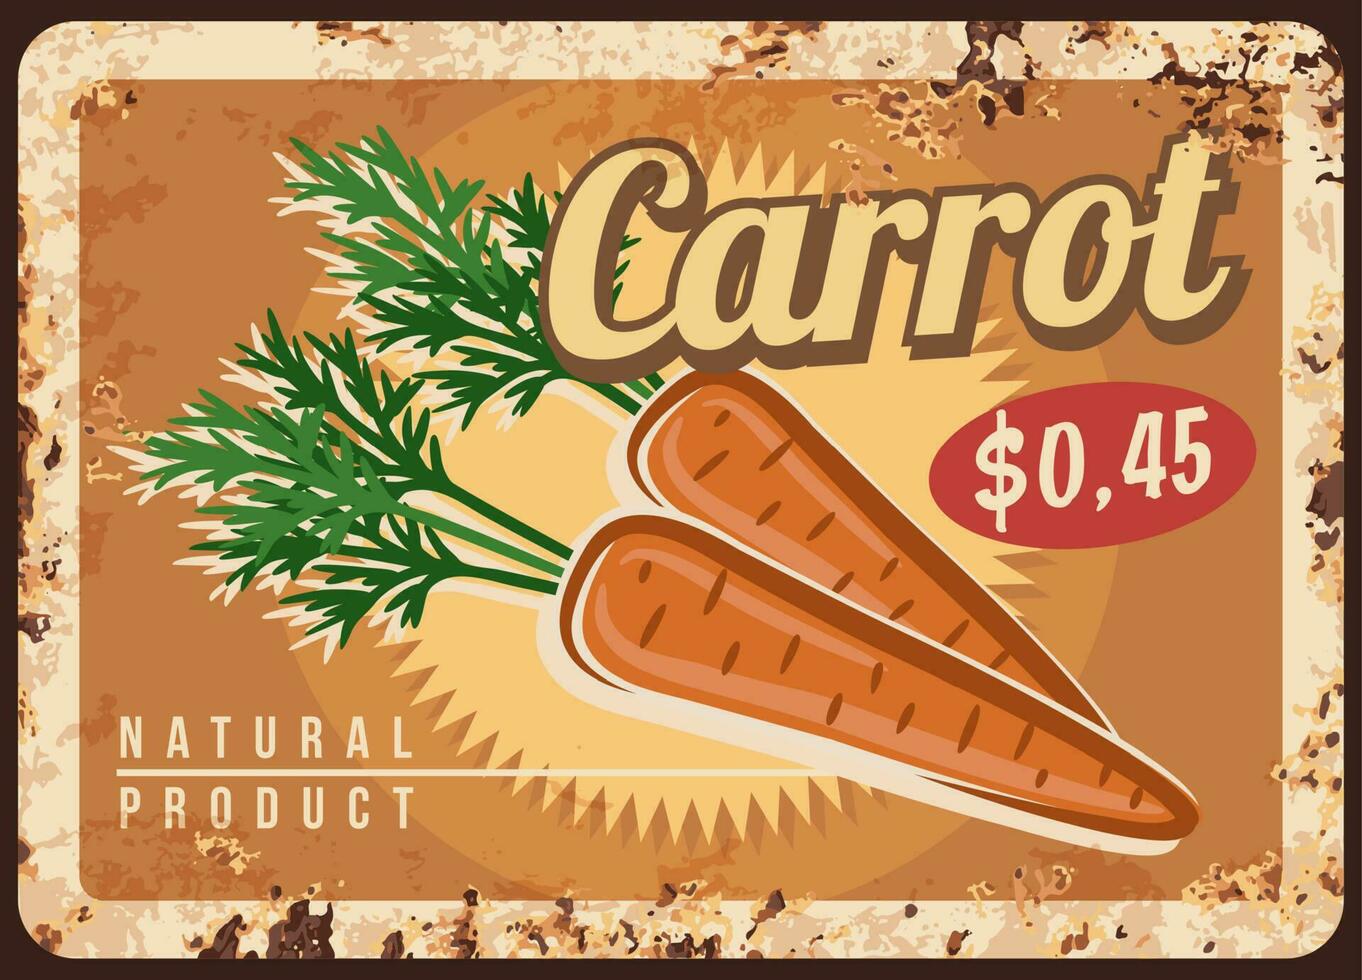 Carrot metal plate rust, vegetable farm price sign vector